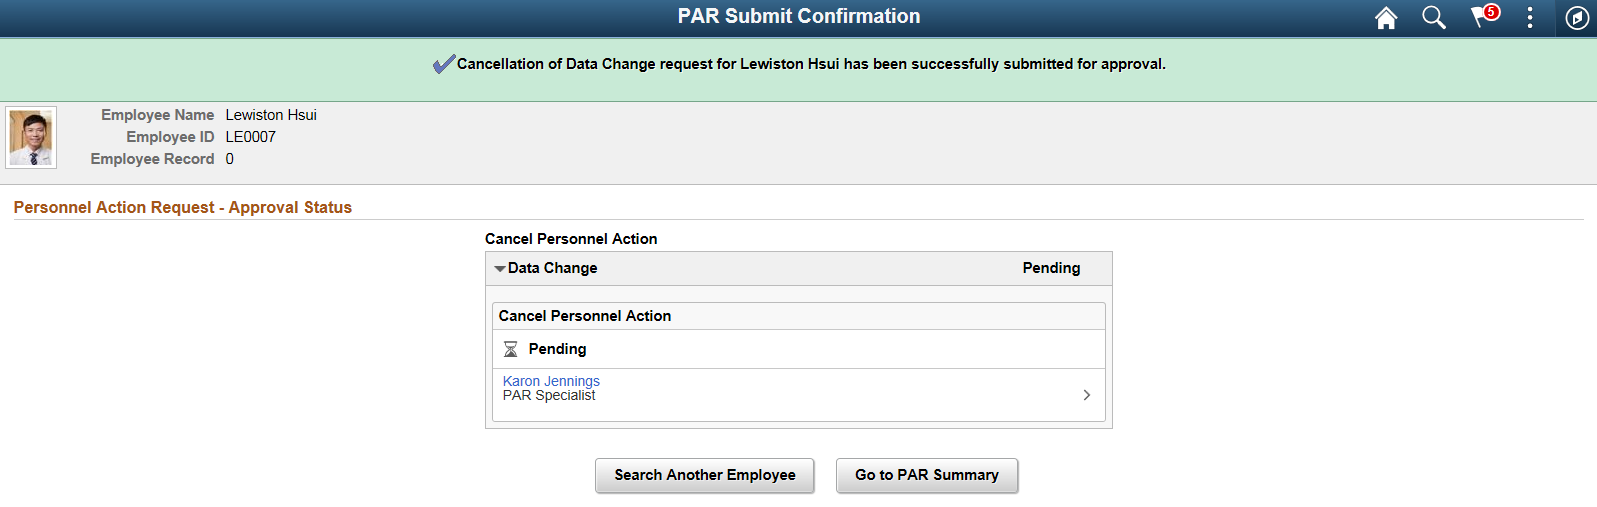 PAR Submit Confirmation page_Cancellation